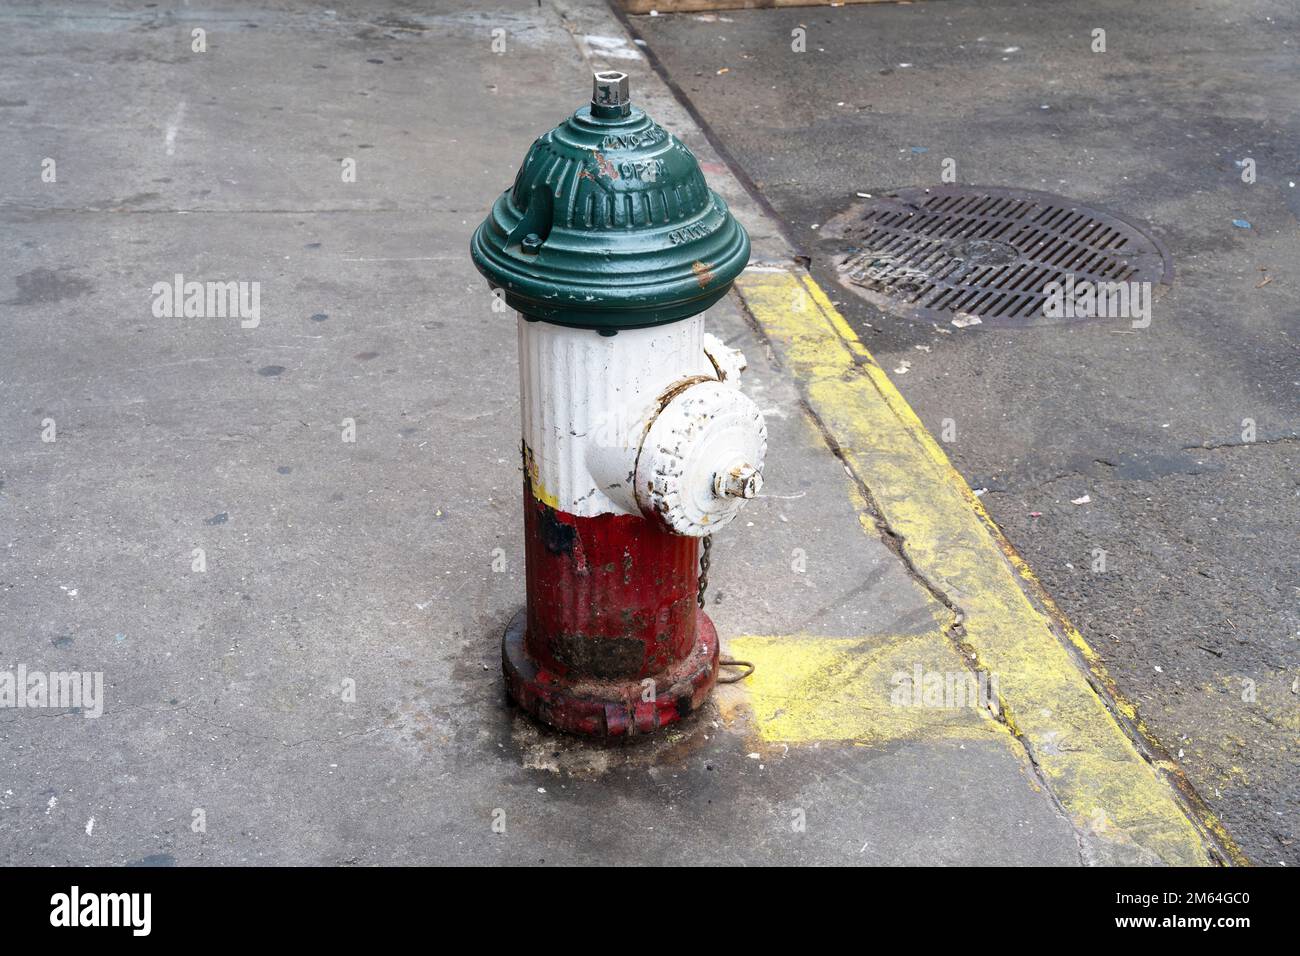 Fire hydrant in Little Italy, New York City Stock Photo